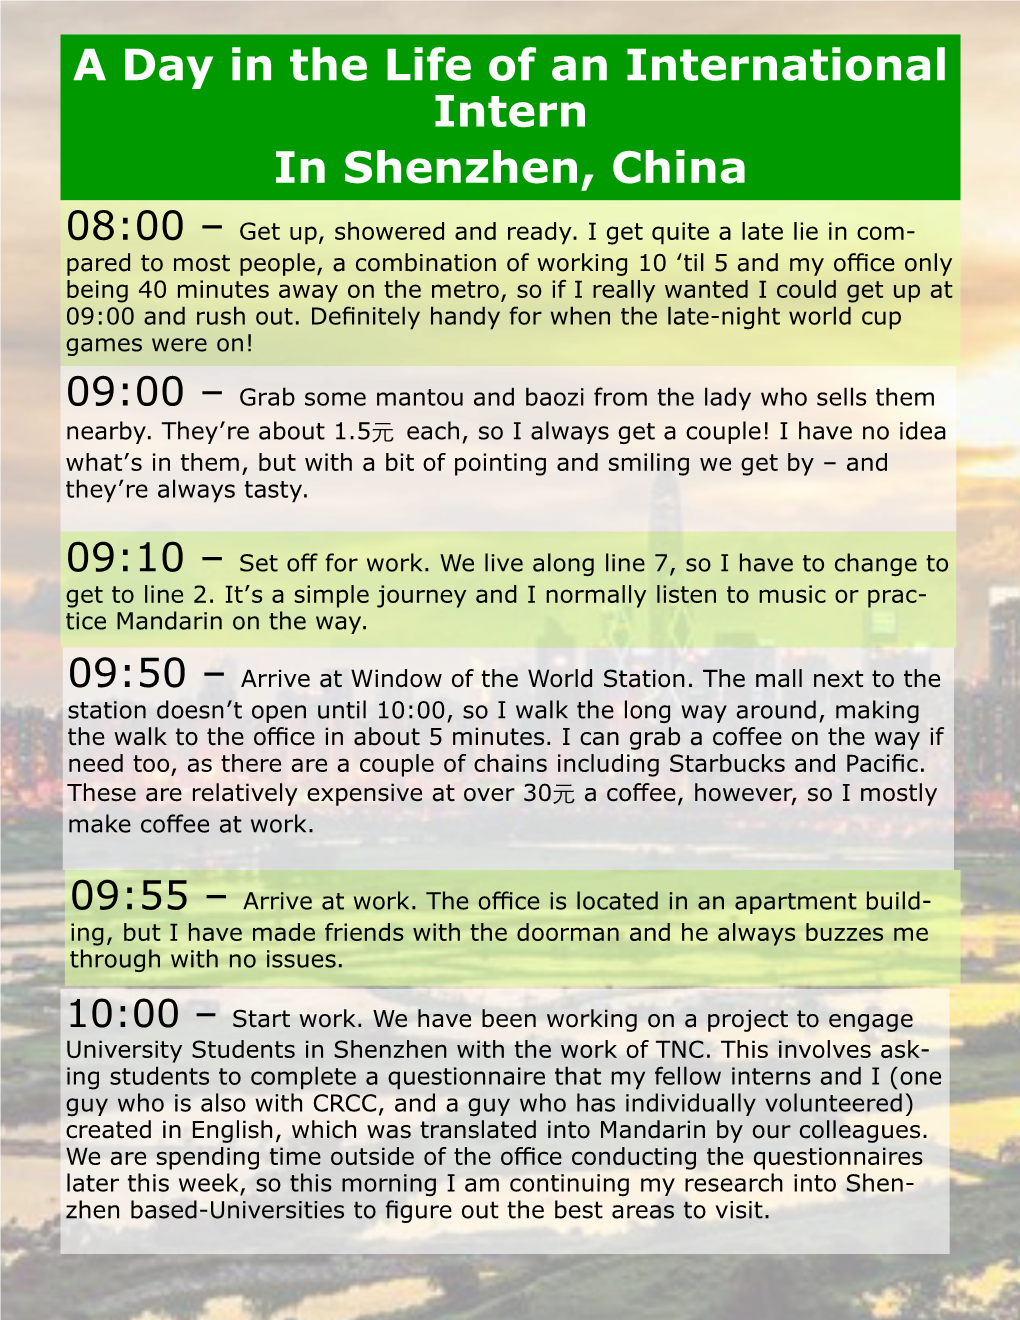 A Day in the Life of an International Intern in Shenzhen, China